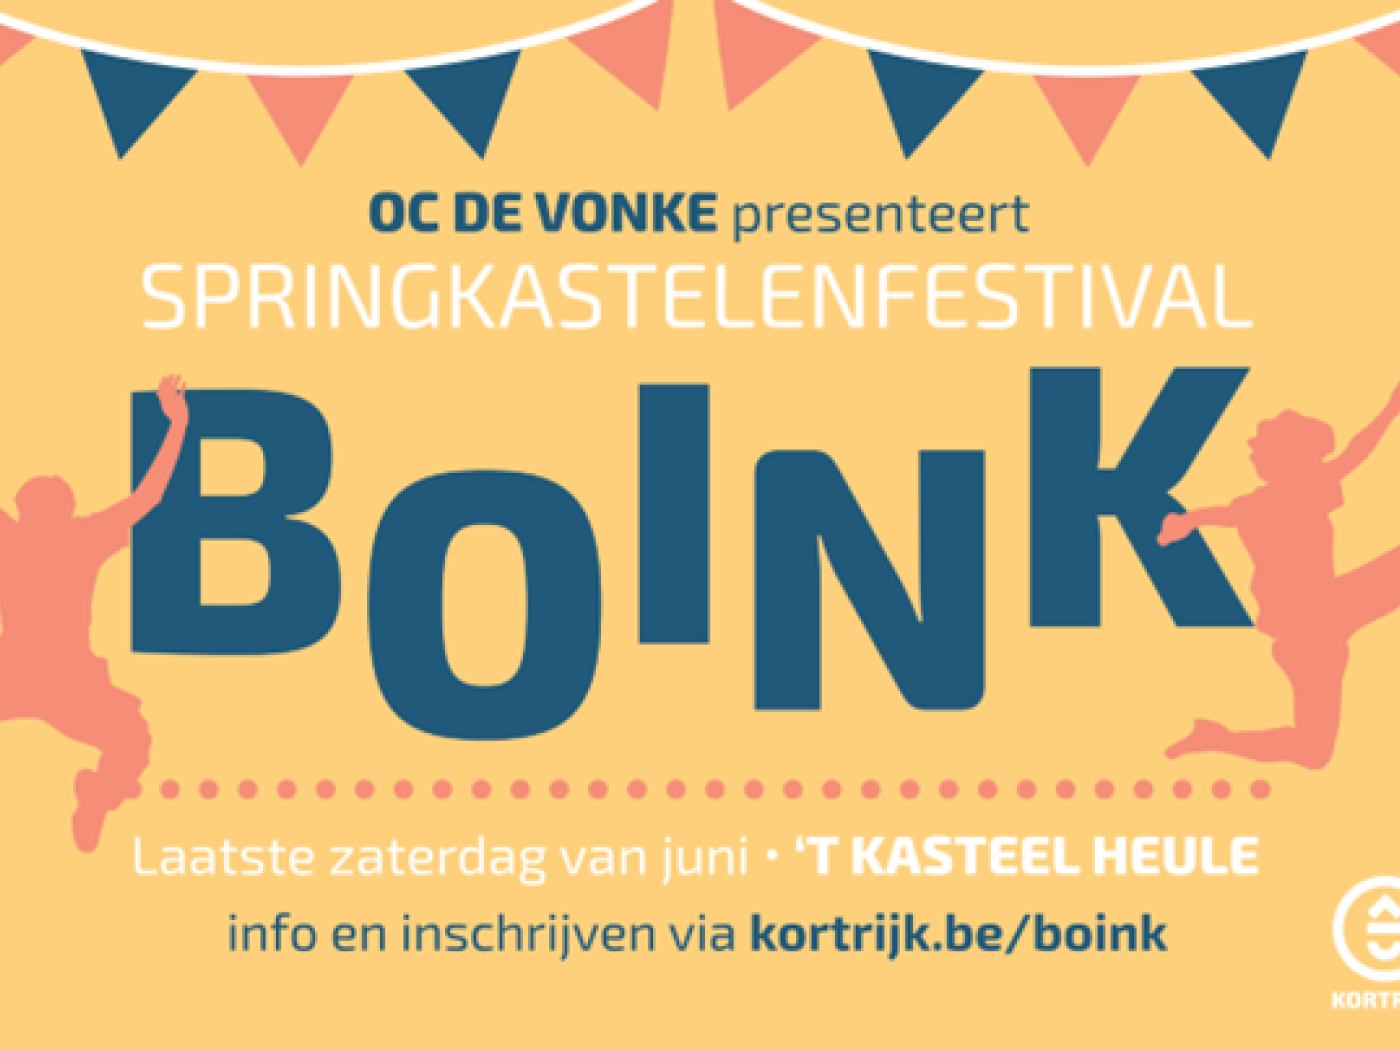 Affiche voor BOINK Festival